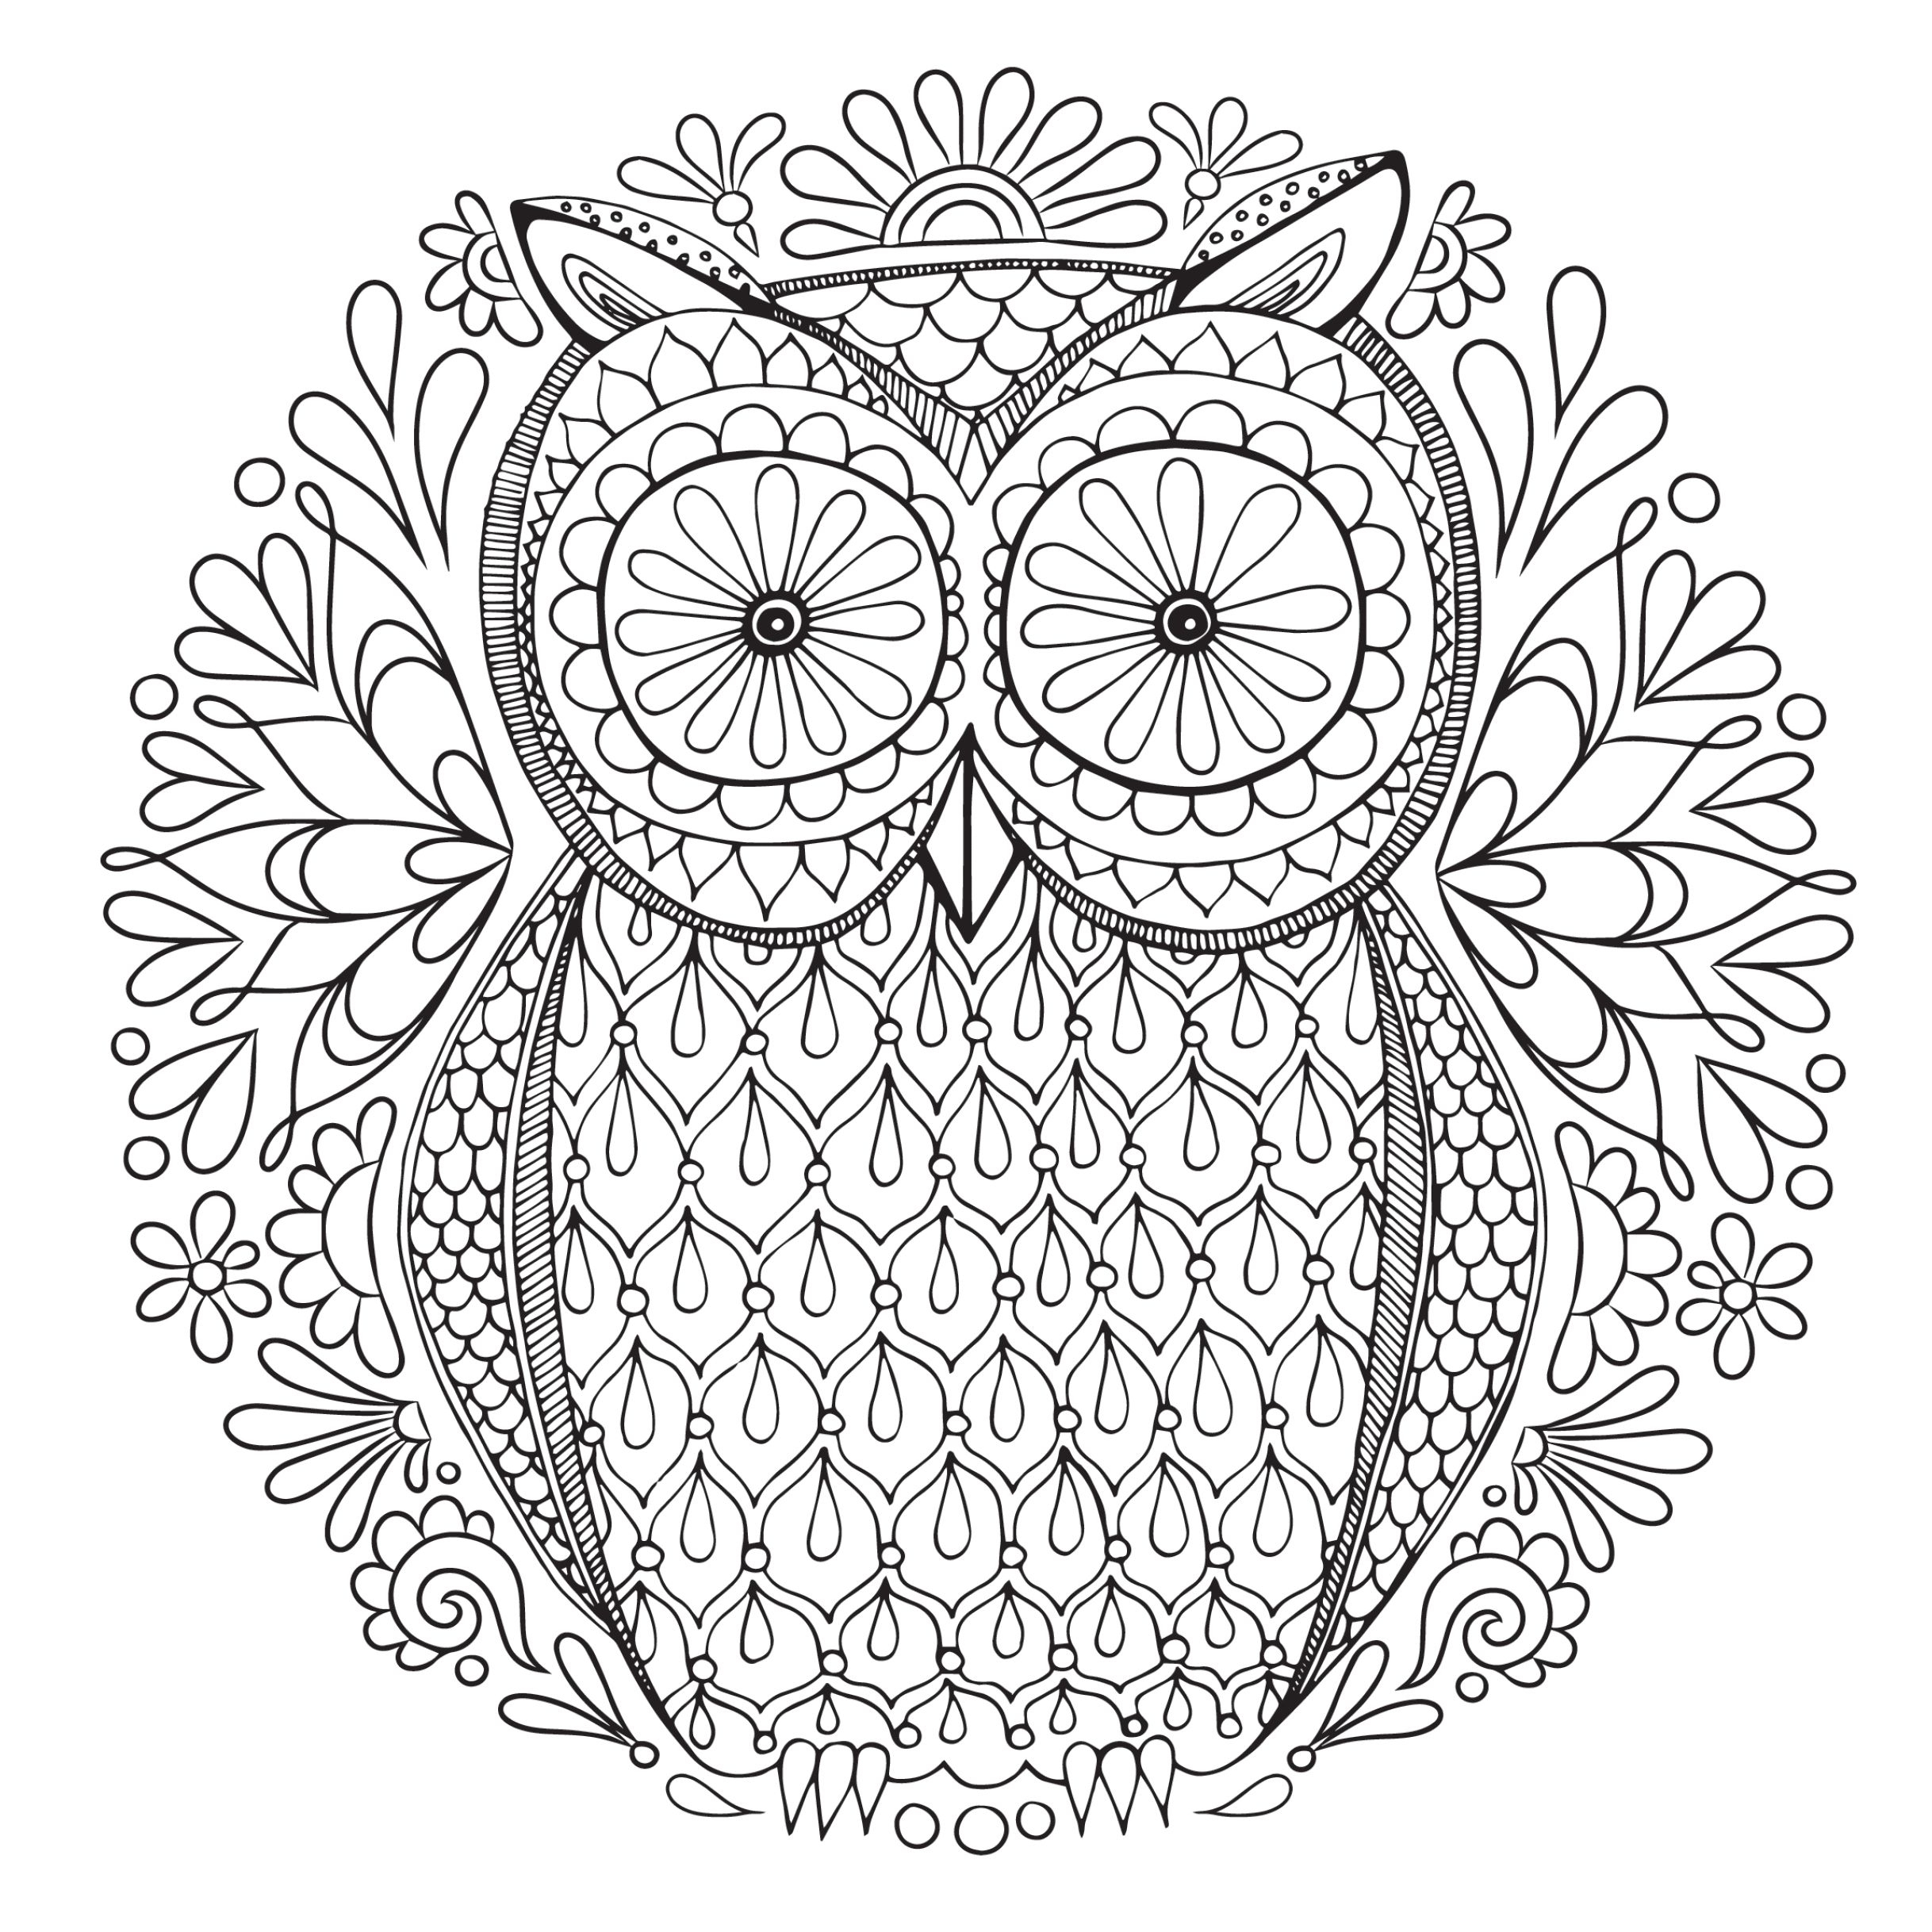 Free, Printable Coloring Pages For Adults - Free Printable Coloring Pages For Adults Only